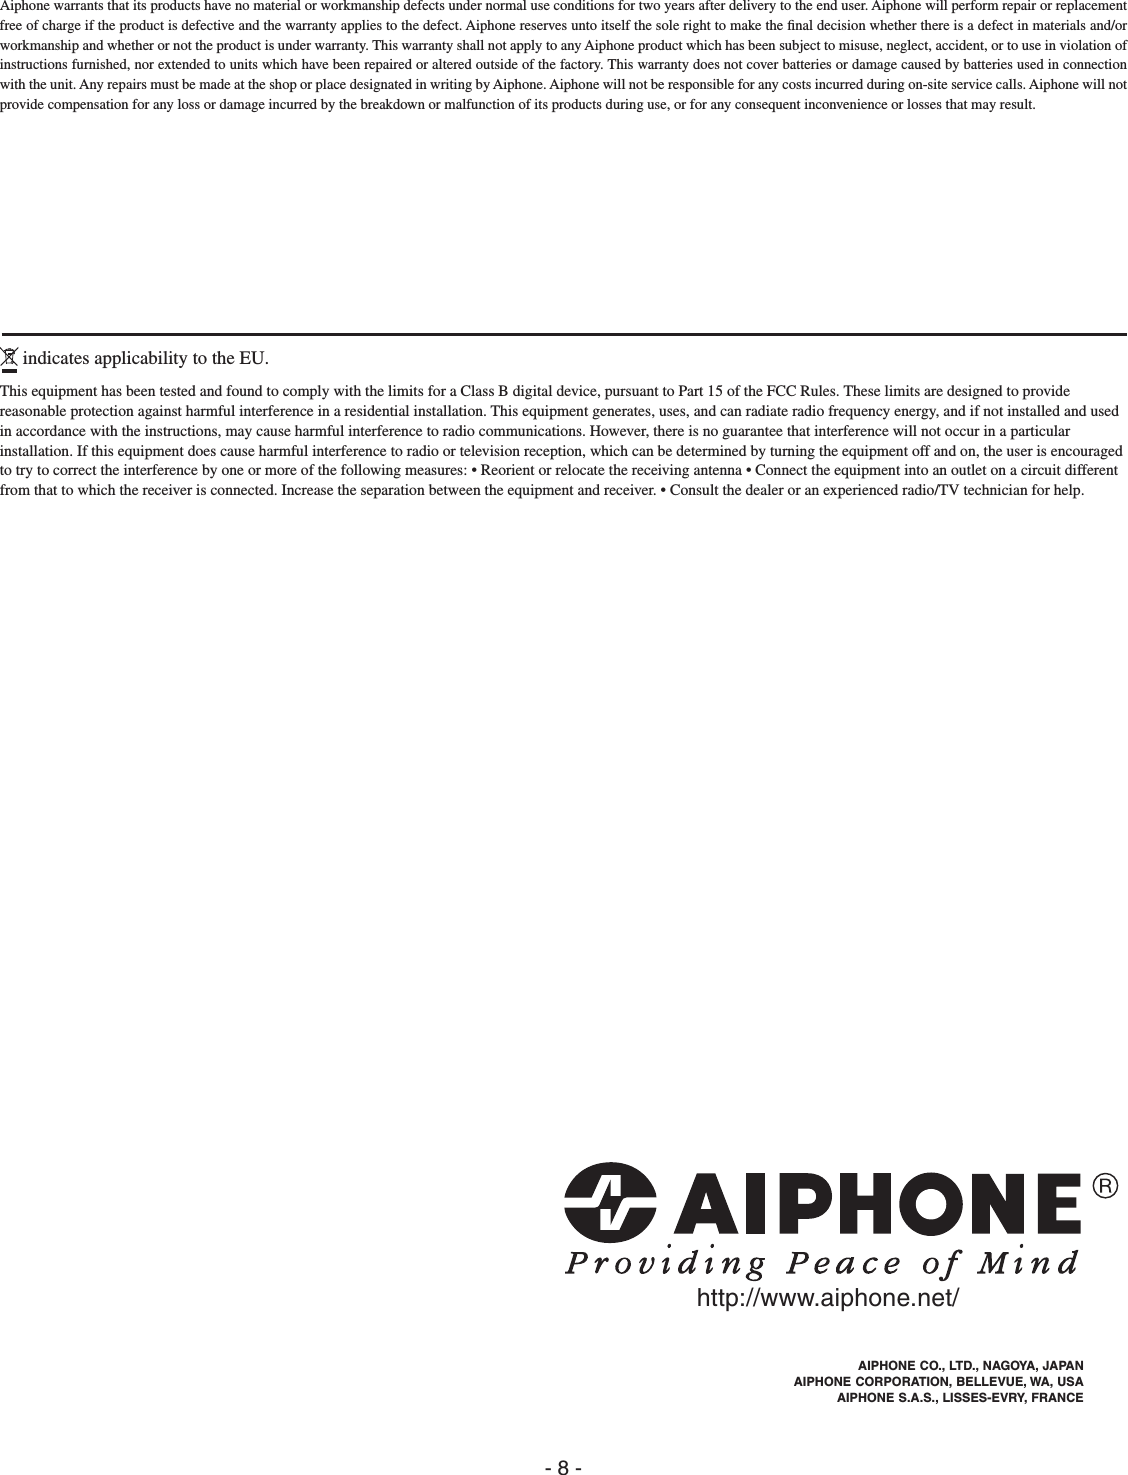 Page 8 of 8 - Aiphone GT1D取説-EN GT-1D Apartment Intercom System Residential Station GT-1DOperation Manual